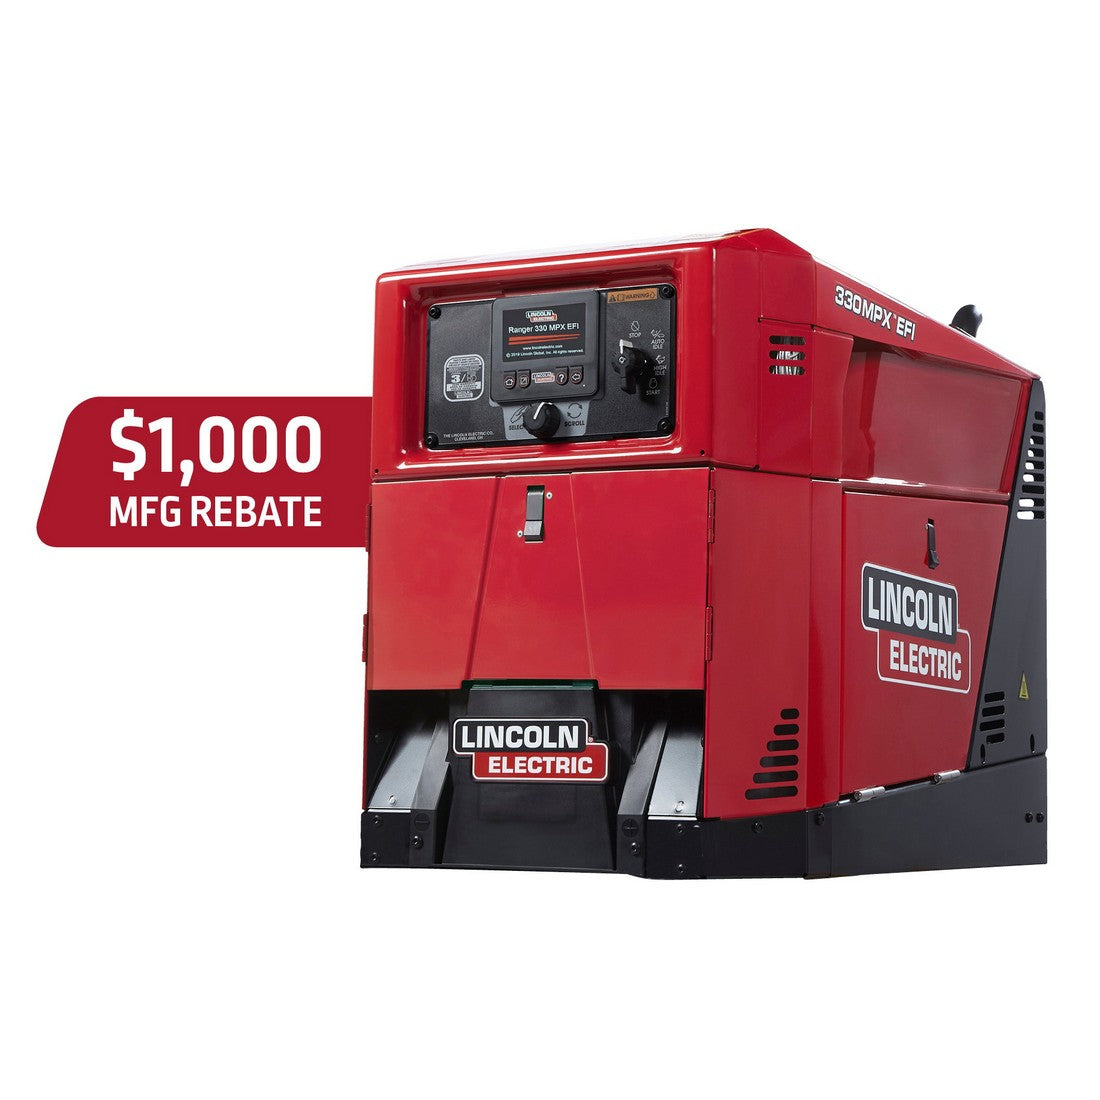 Lincoln Electric on Instagram: The Ranger 330MPX welder and generator  leads the way for the construction, maintenance, and service truck  industries! Click the link in our bio to check out all our